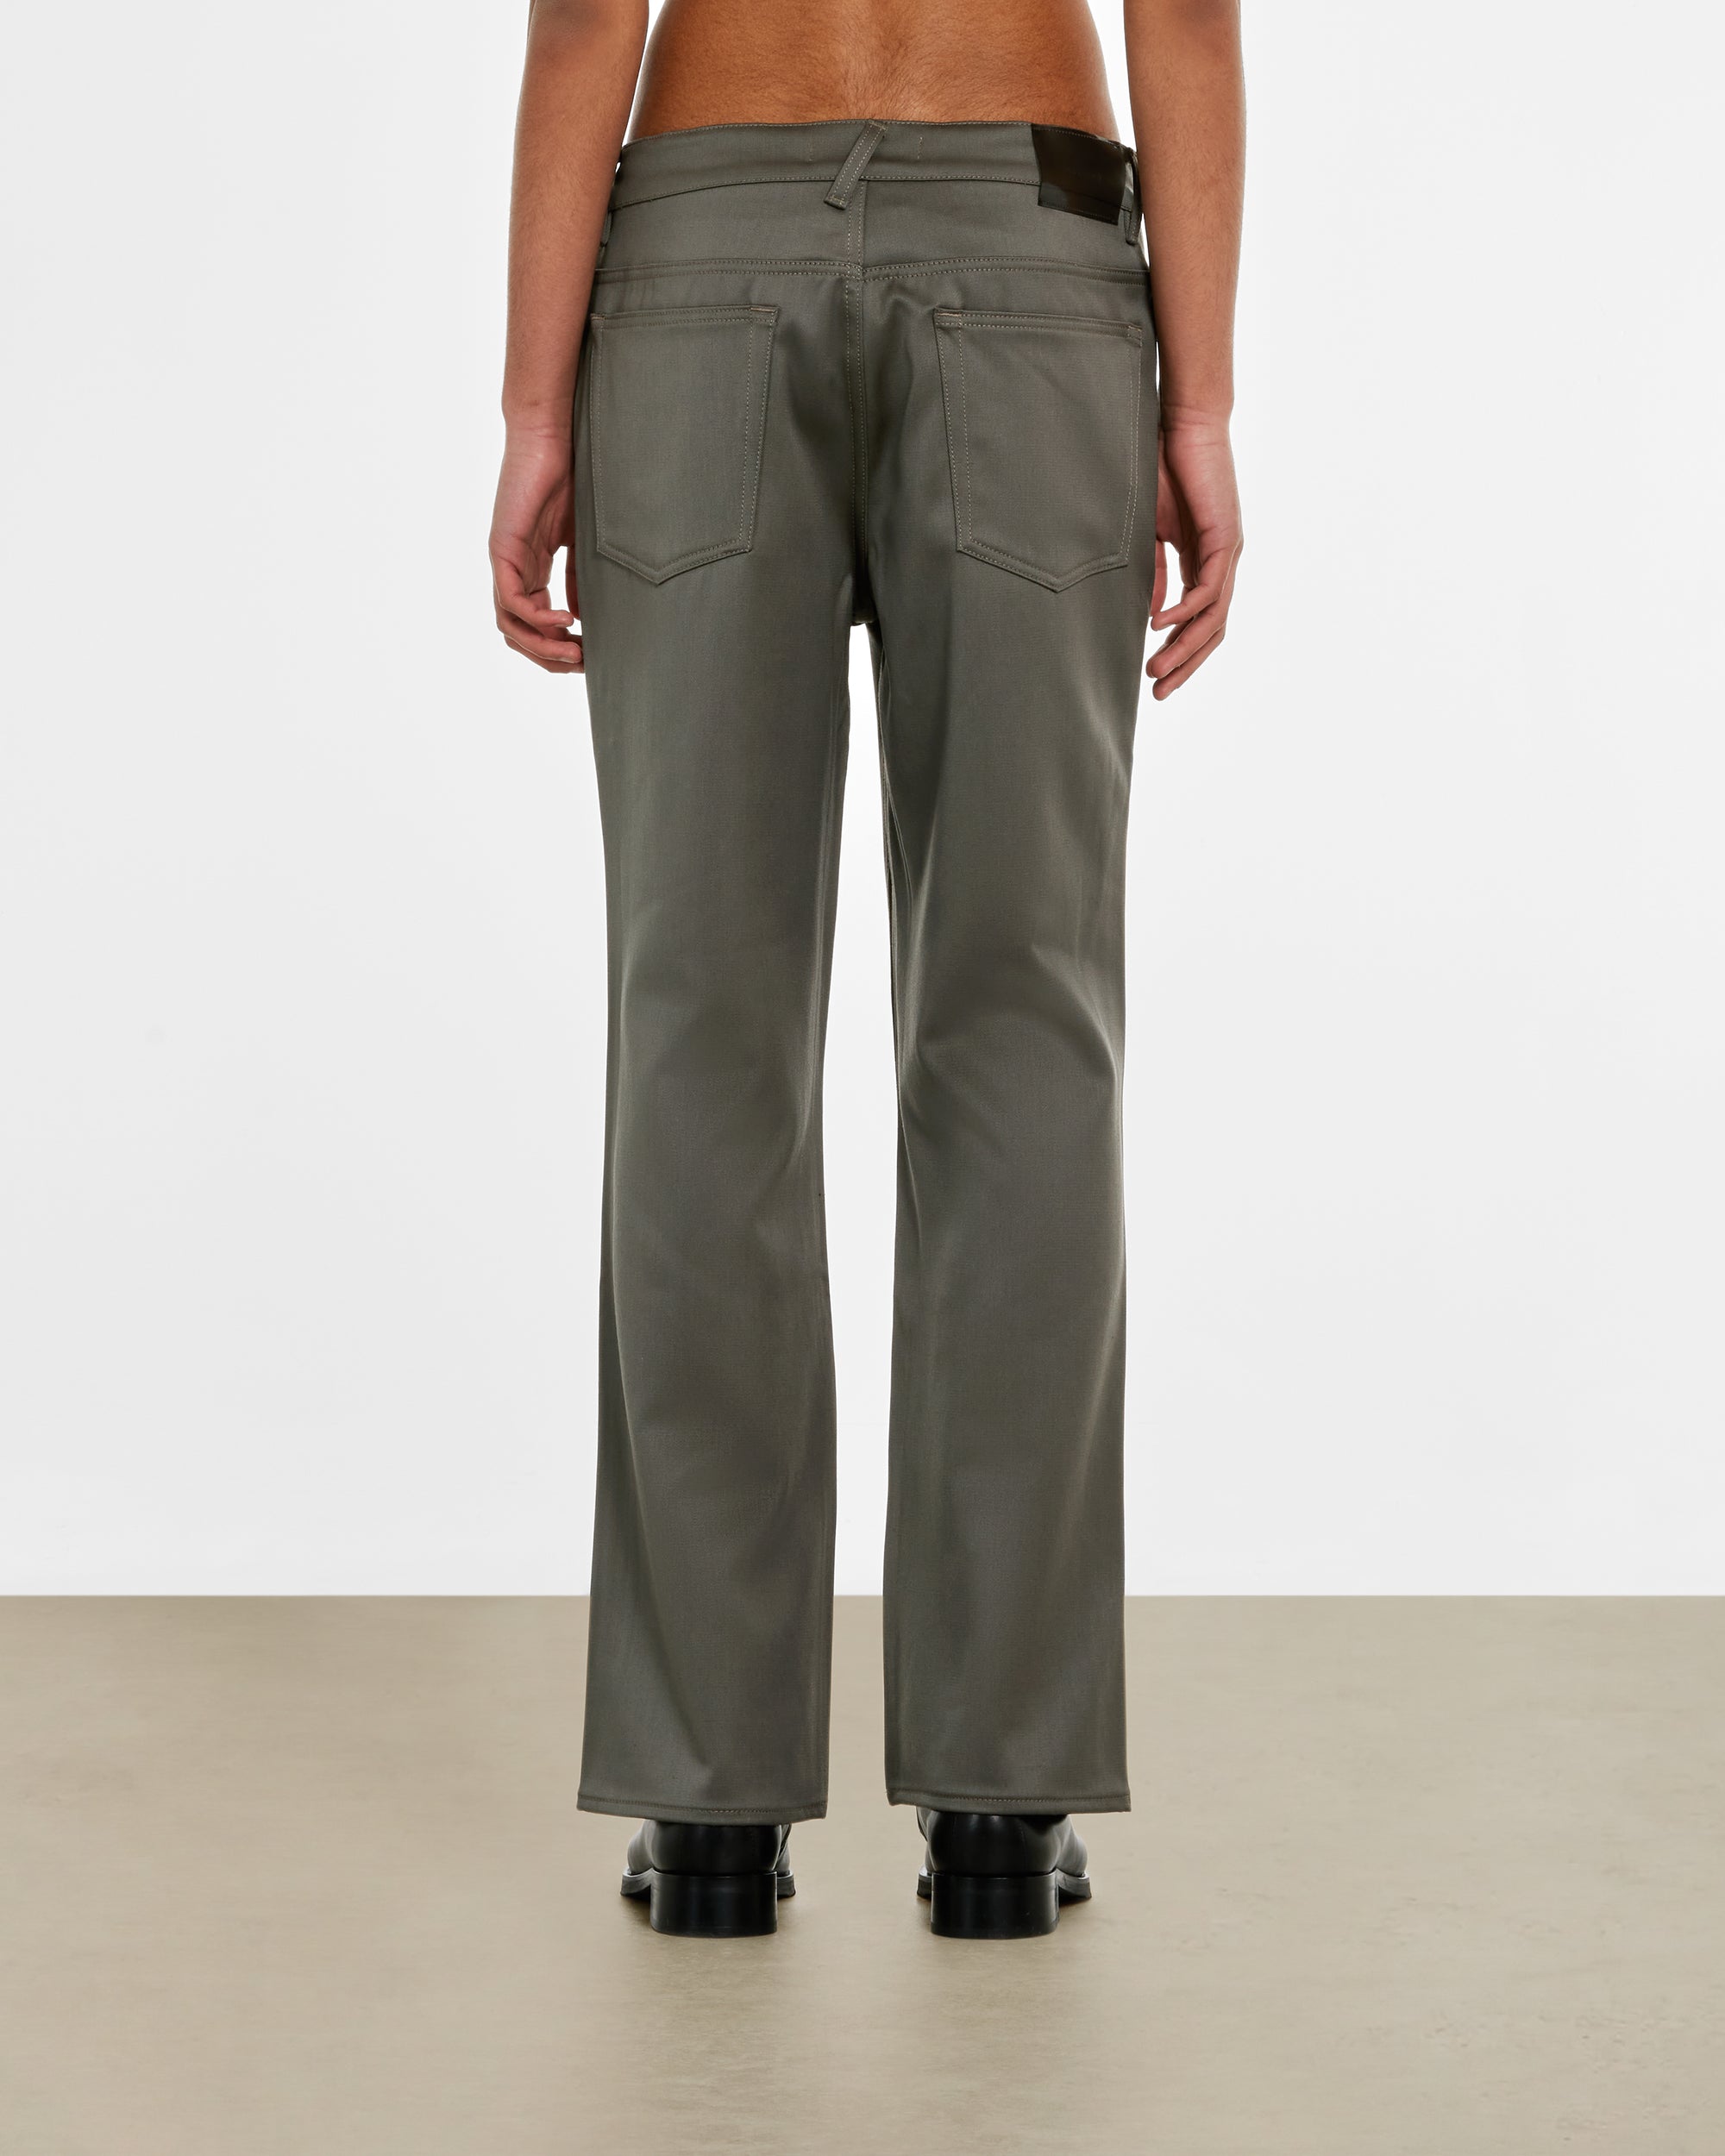 Our Legacy - Men’s 70S Cut Trousers - (Grey) view 5